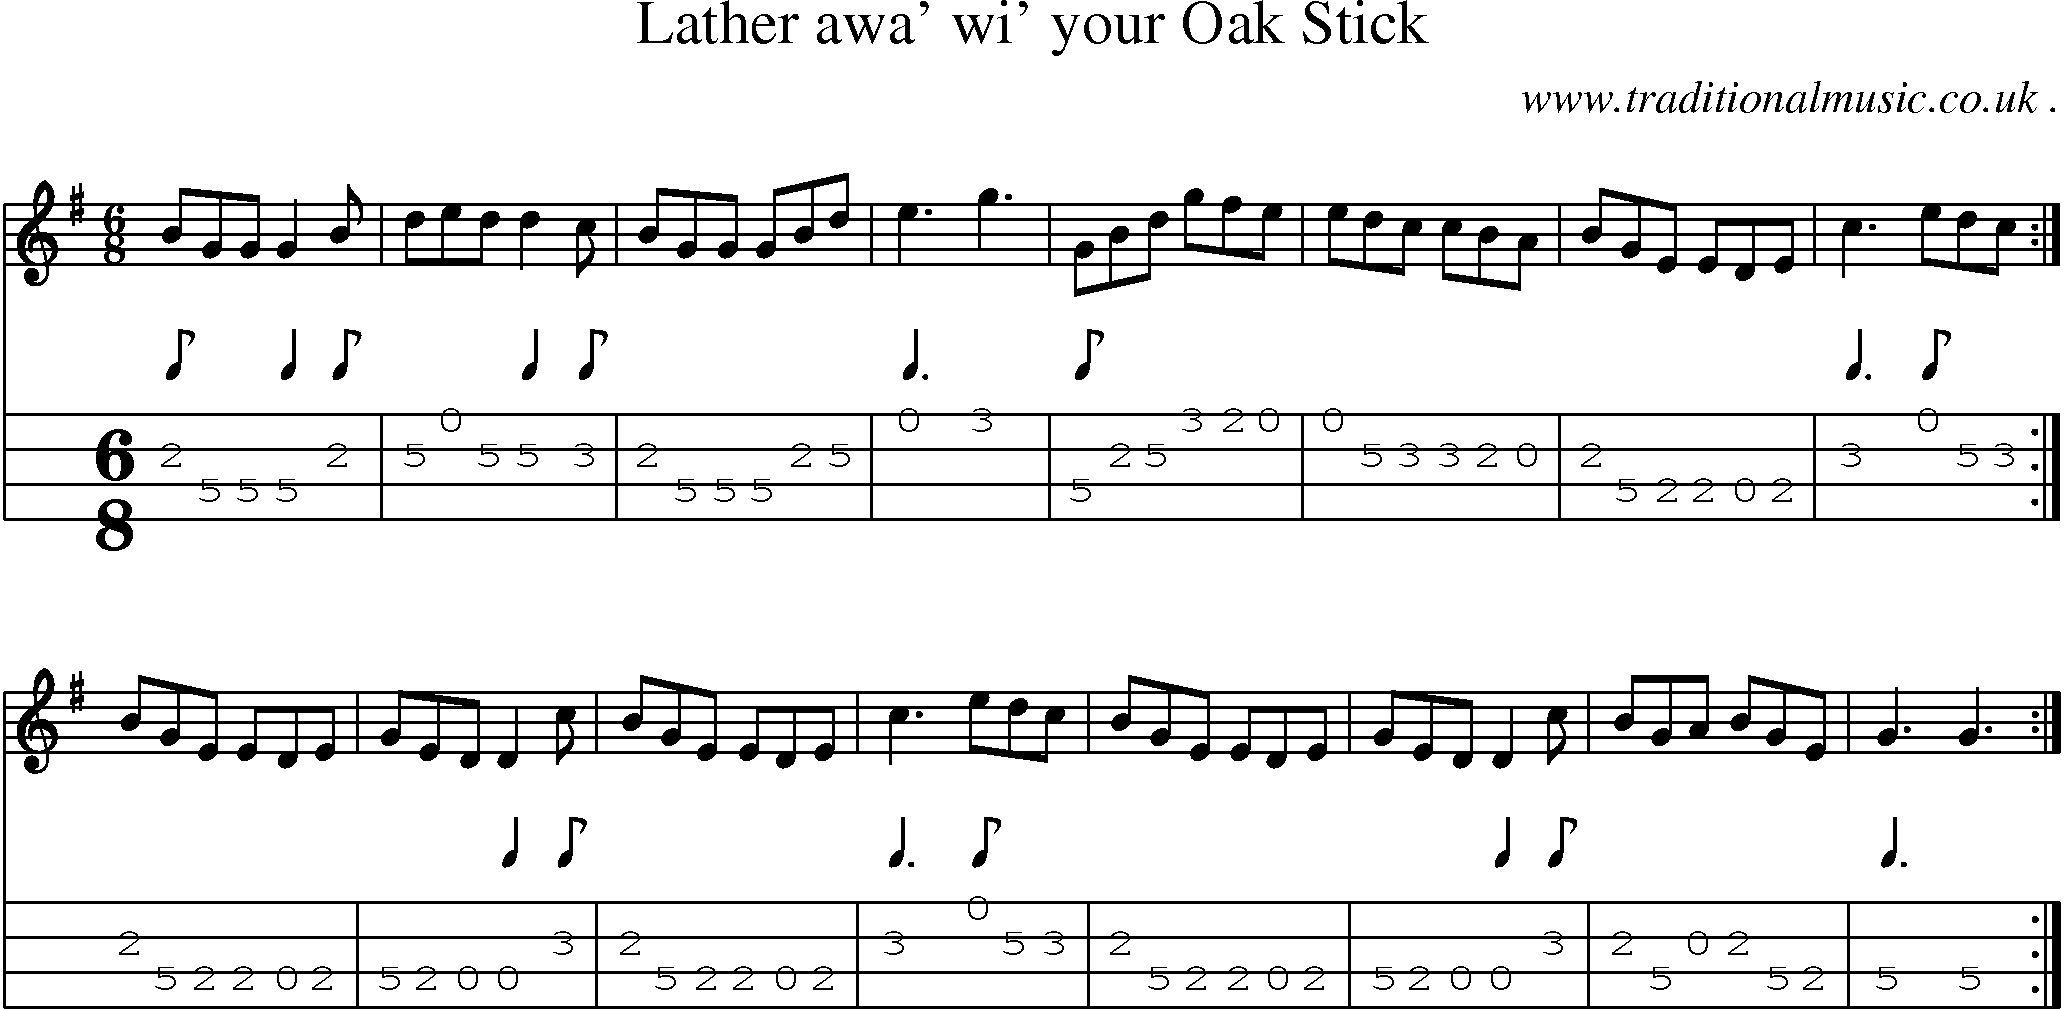 Sheet-Music and Mandolin Tabs for Lather Awa Wi Your Oak Stick